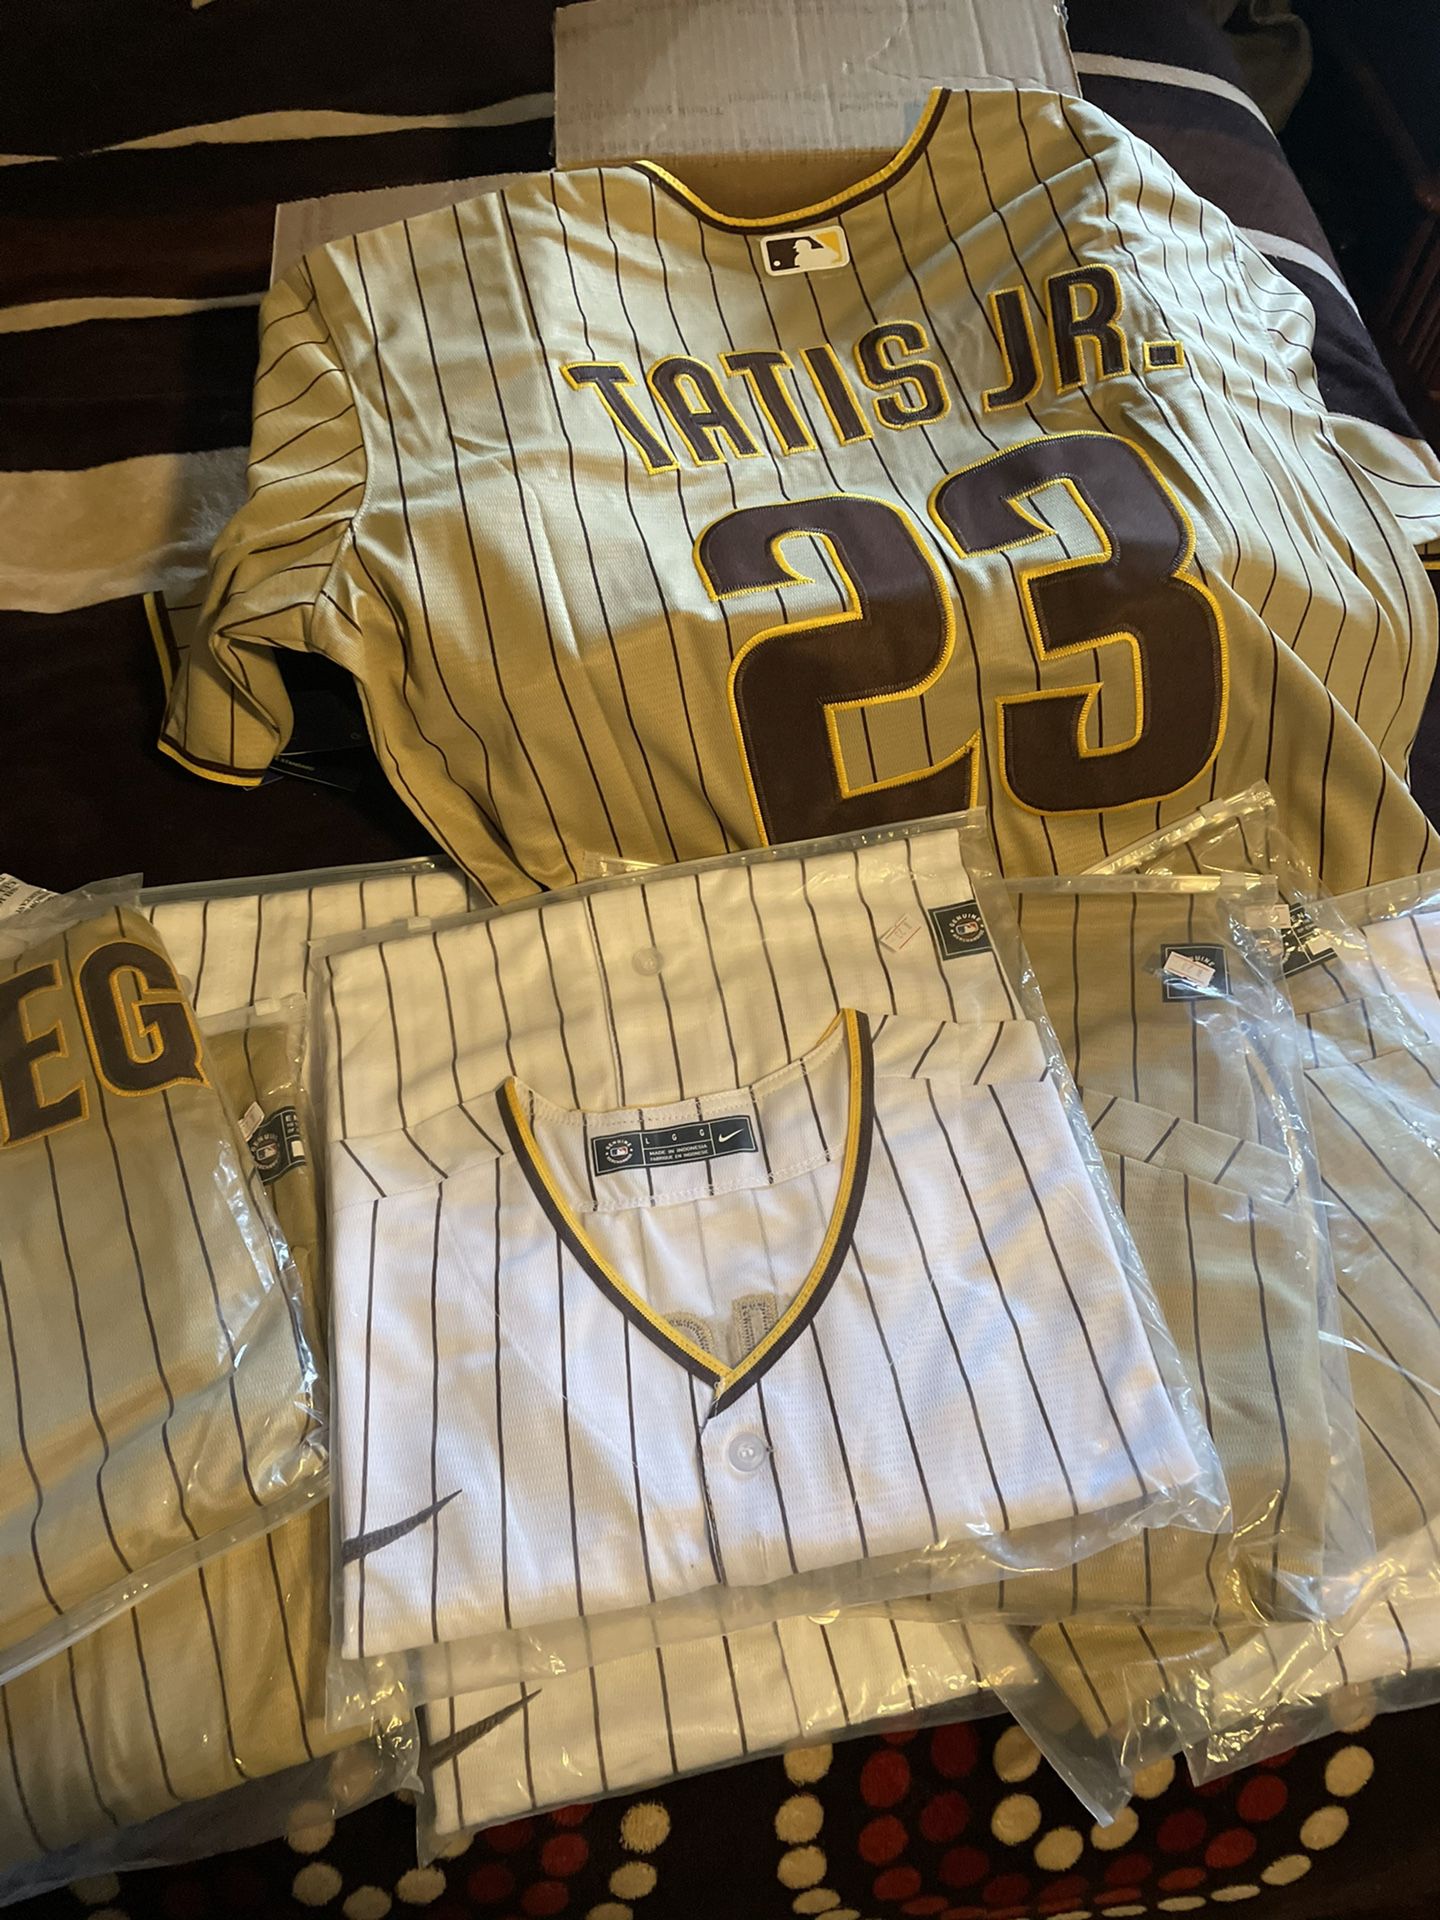 Official Home & Away Jersey San Diego Padres Jersey for Sale in El Cajon,  CA - OfferUp